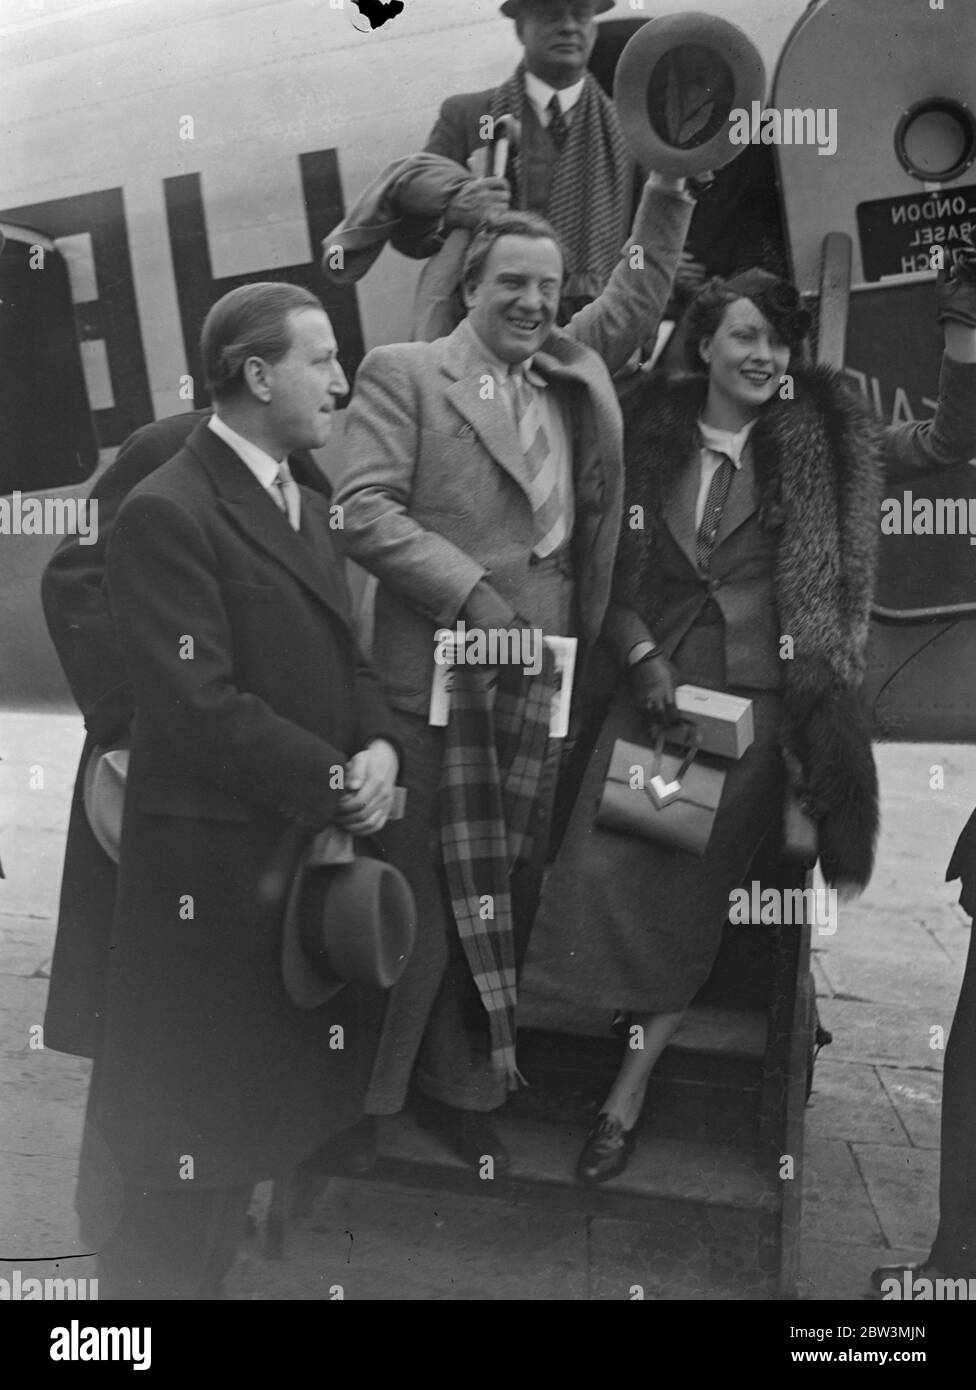 Richard Tauber and film actress fiancee . Richard Tauber , the singer , accompanied by his fiancee , Diana Napier , the film actress , arrived at Croydon by air from Zurich . The Vienna courts recently granted a divorce between Tauber and his wife . Photo shows , Richard Tauber with his fiancee , Diana Napier , on arrival at Croydon . 17 April 1936 Stock Photo